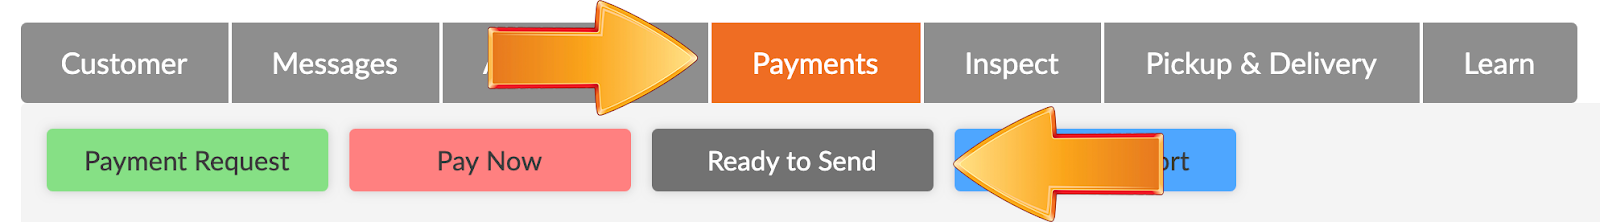 Payments_1_.png